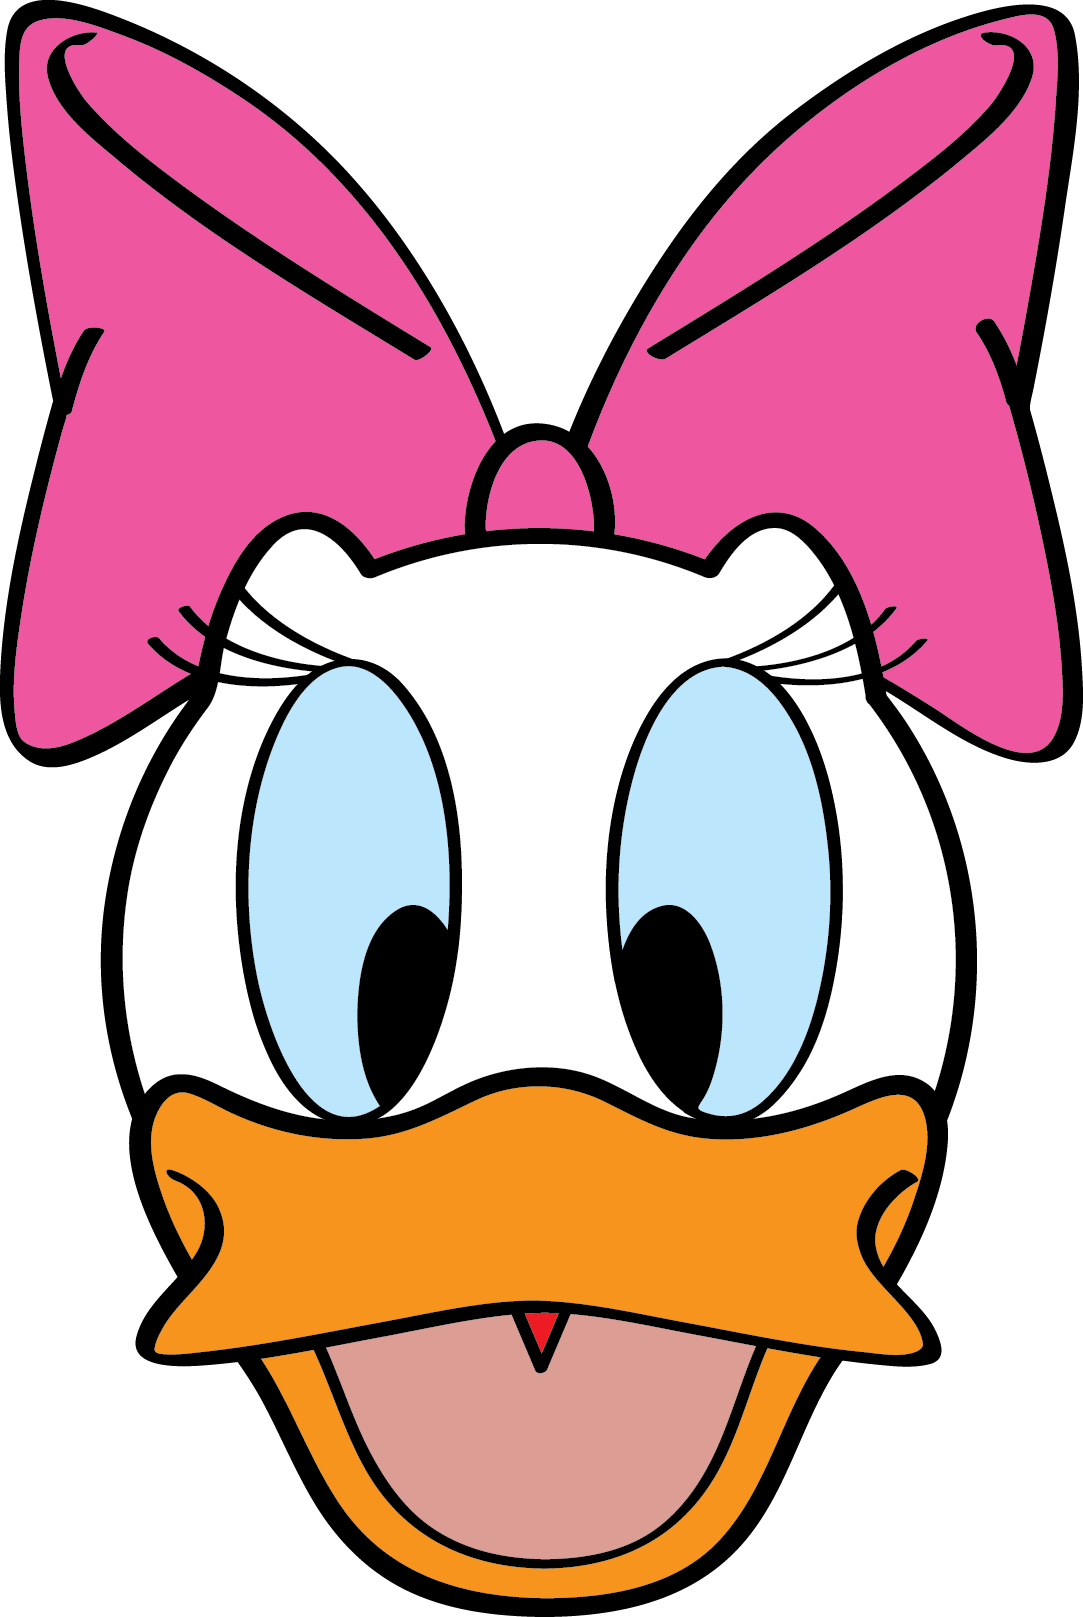 Ducks clipart duck face. Daisy silhouette at getdrawings